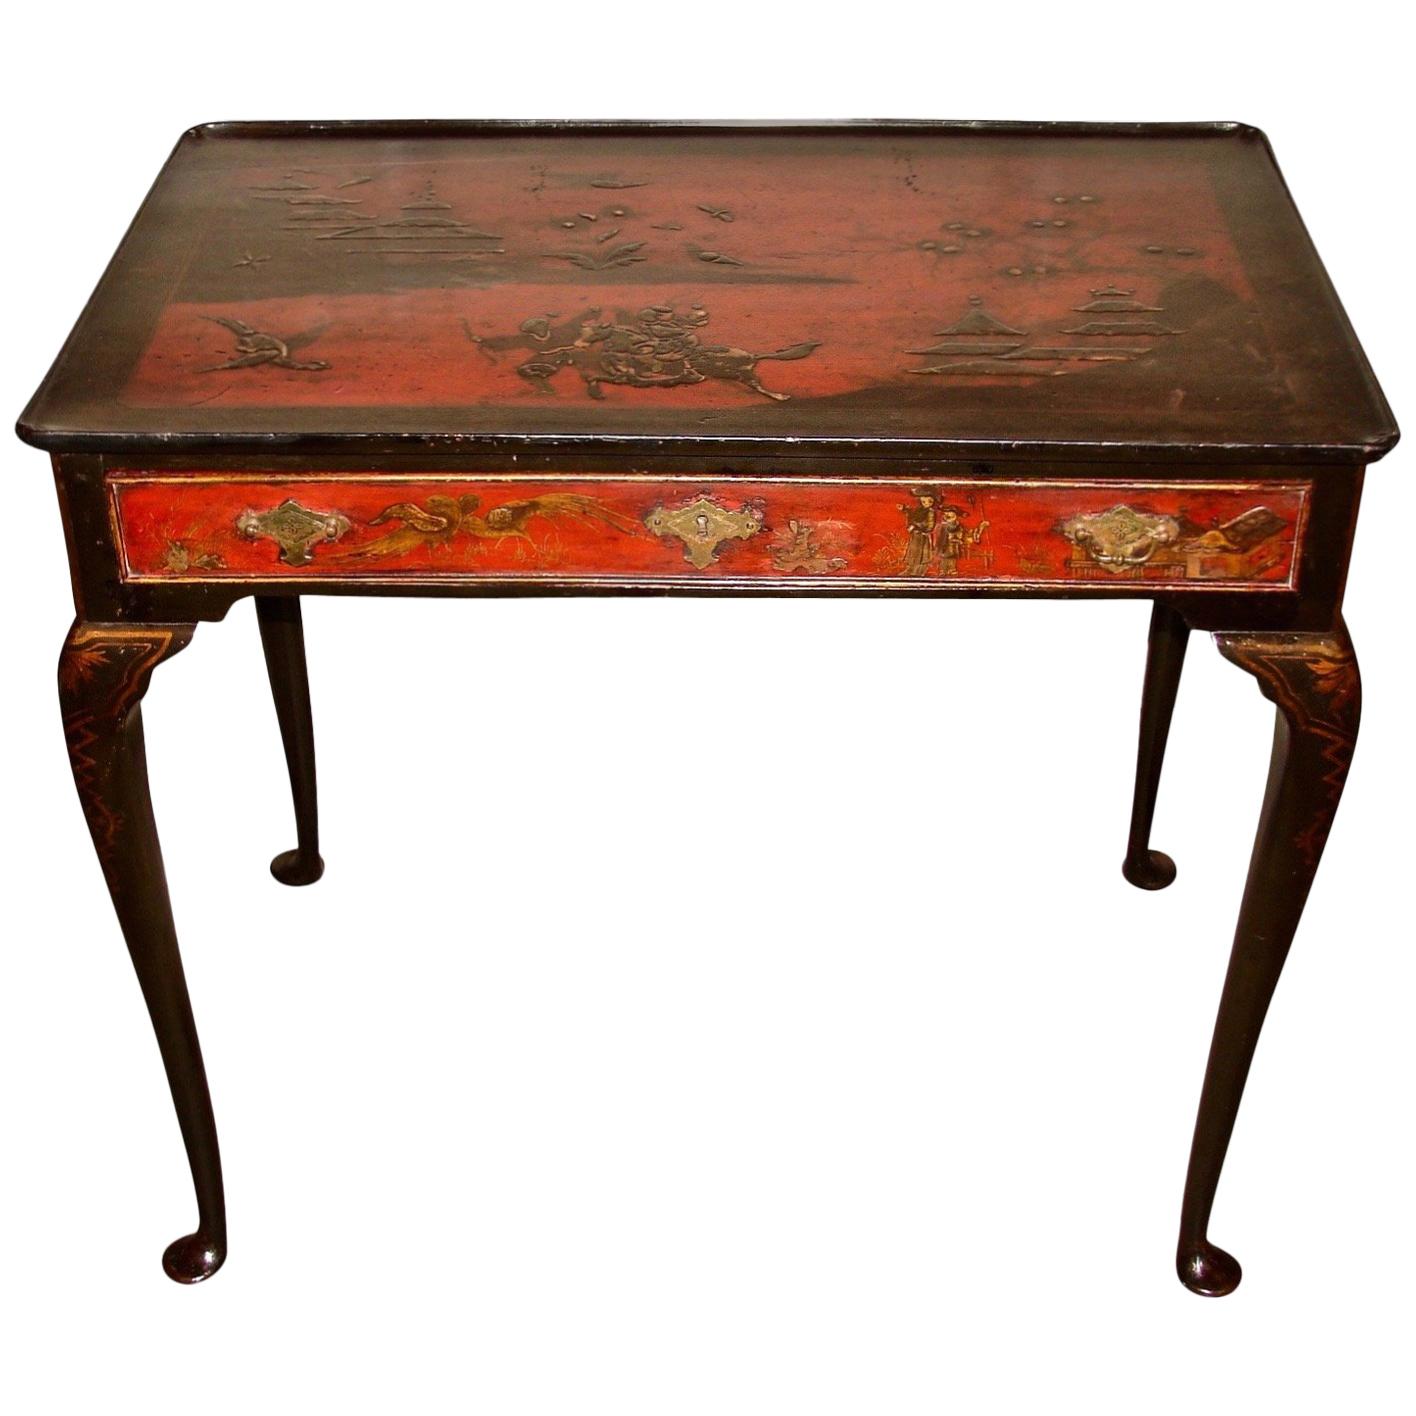 Georgian Red Japanned Side Table with Drawer